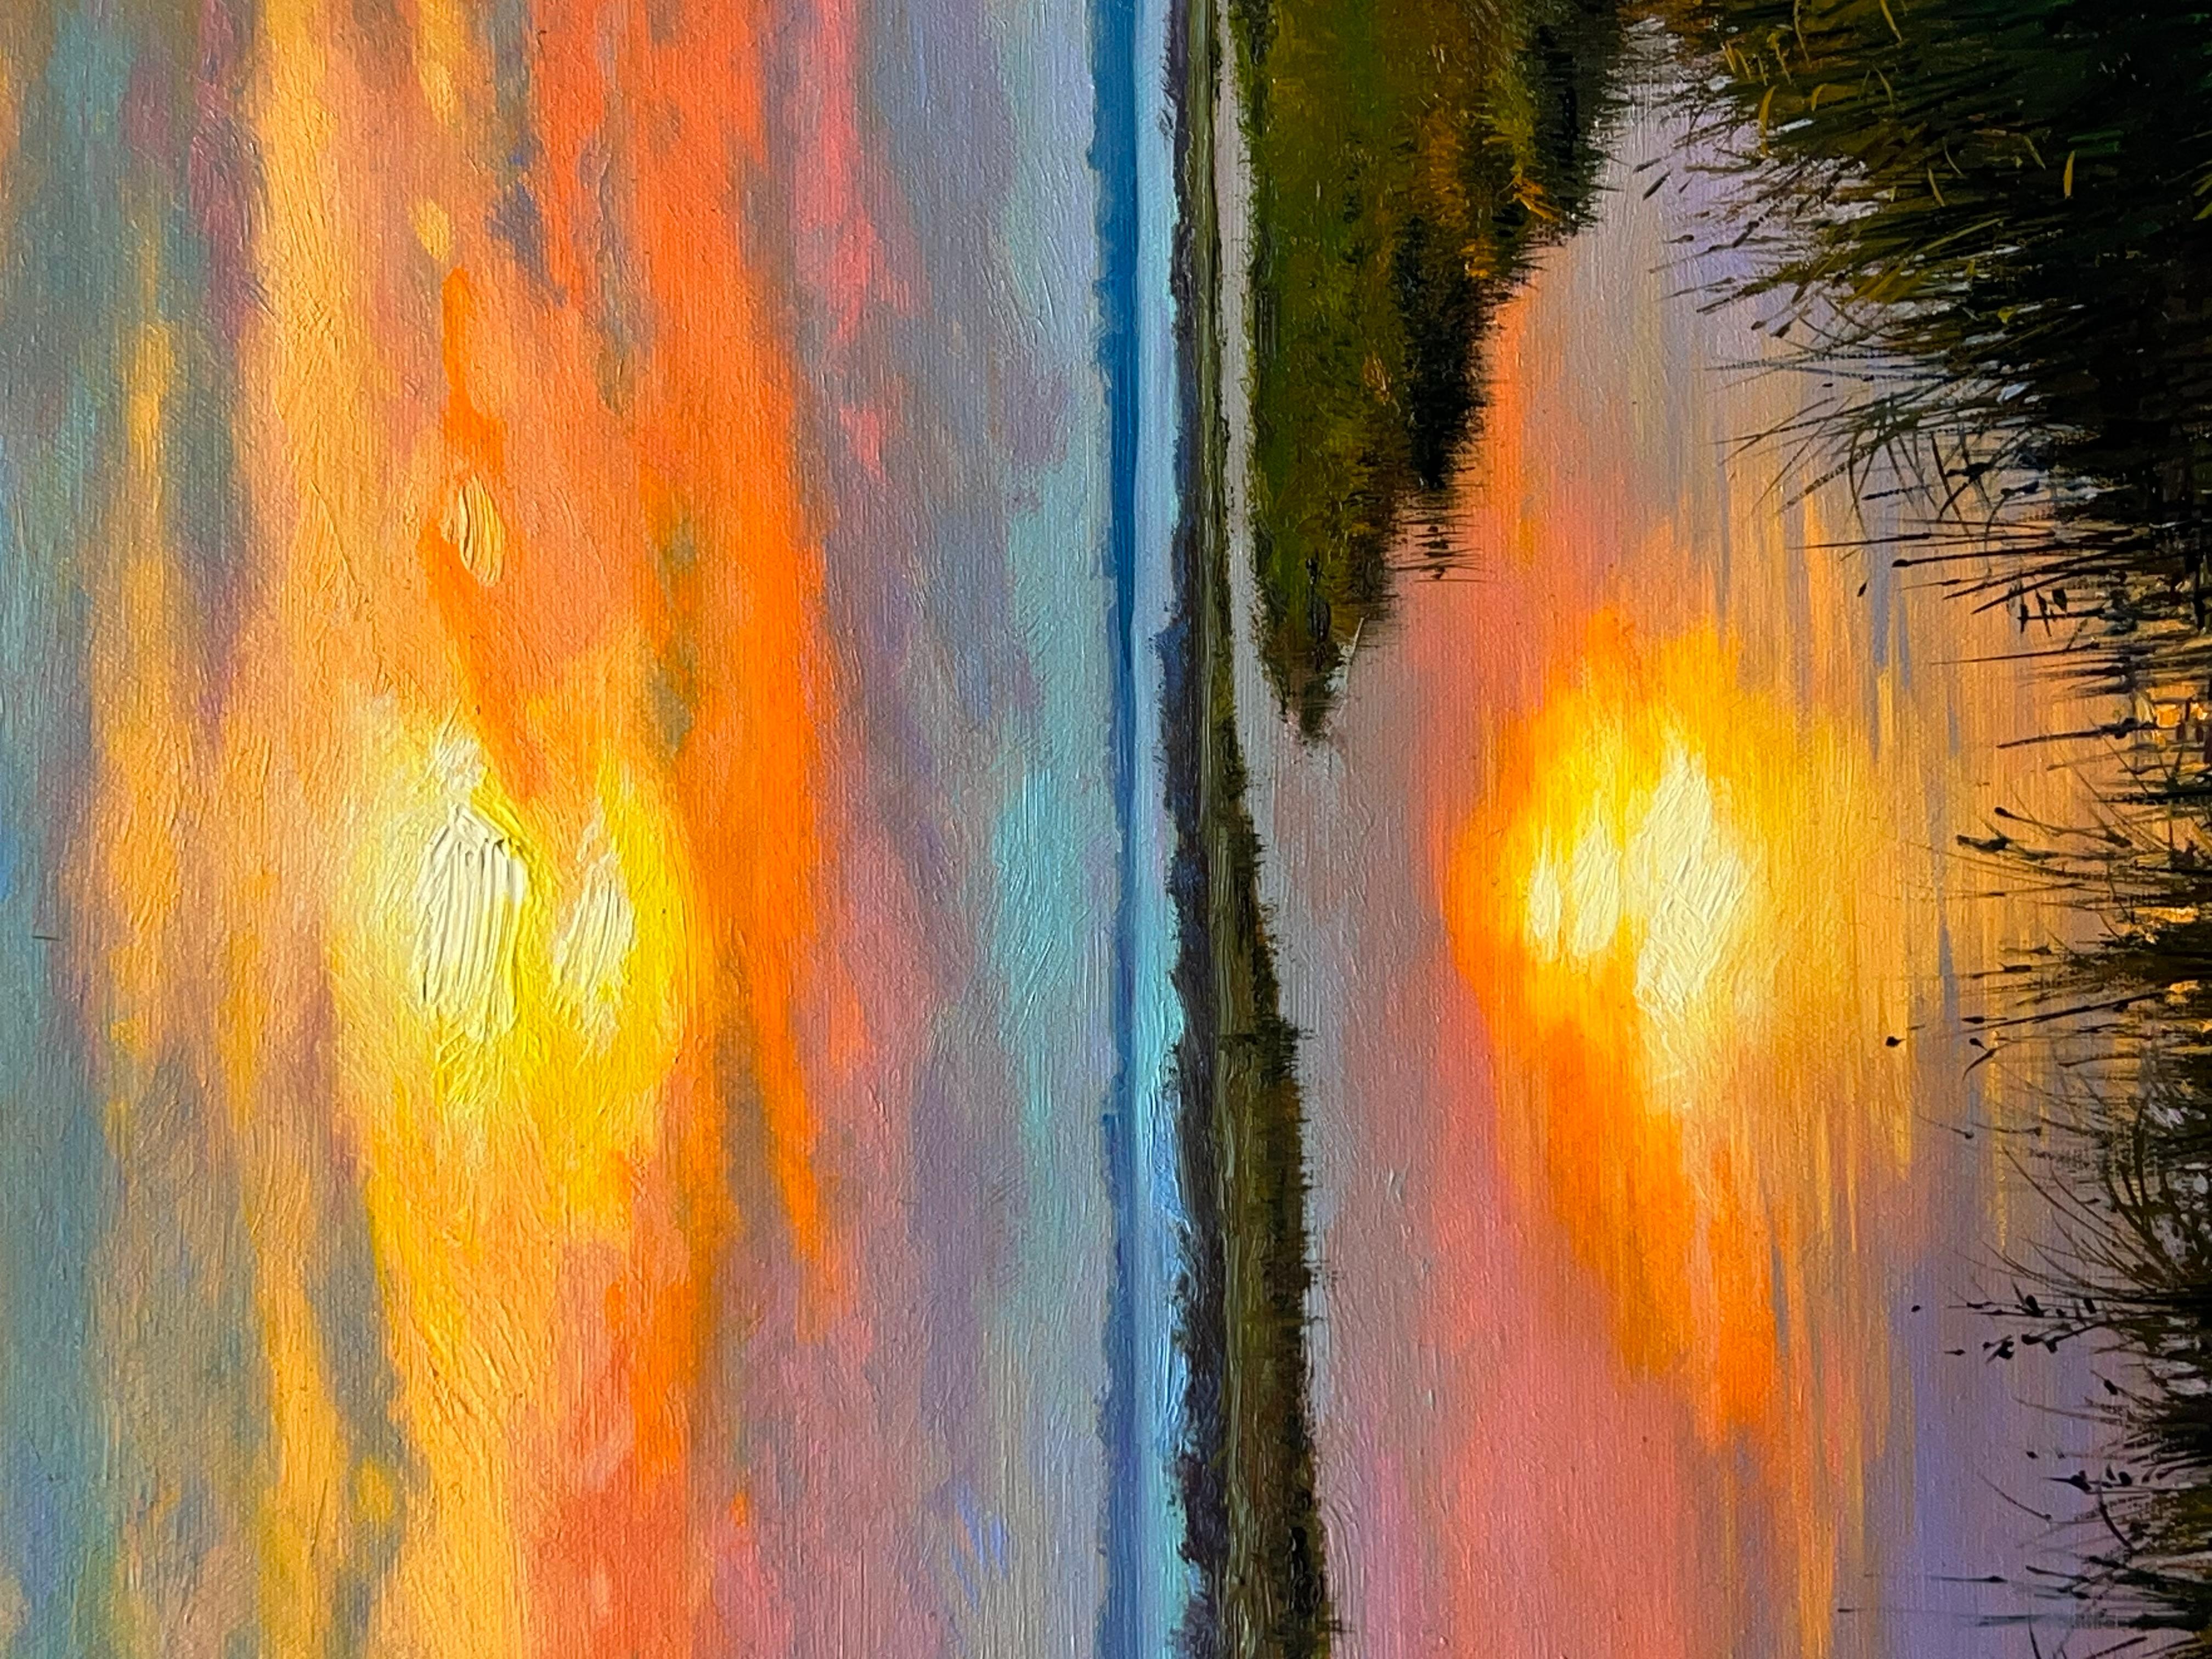 <p>Artist Comments<br>Artist Jose Luis Bermudez captures a majestic sunset from a quiet wetland. He highlights the magnificent twilight with an orange-tinged atmosphere and piercing sunburst. The tranquil water mirrors the sky's radiant colors while